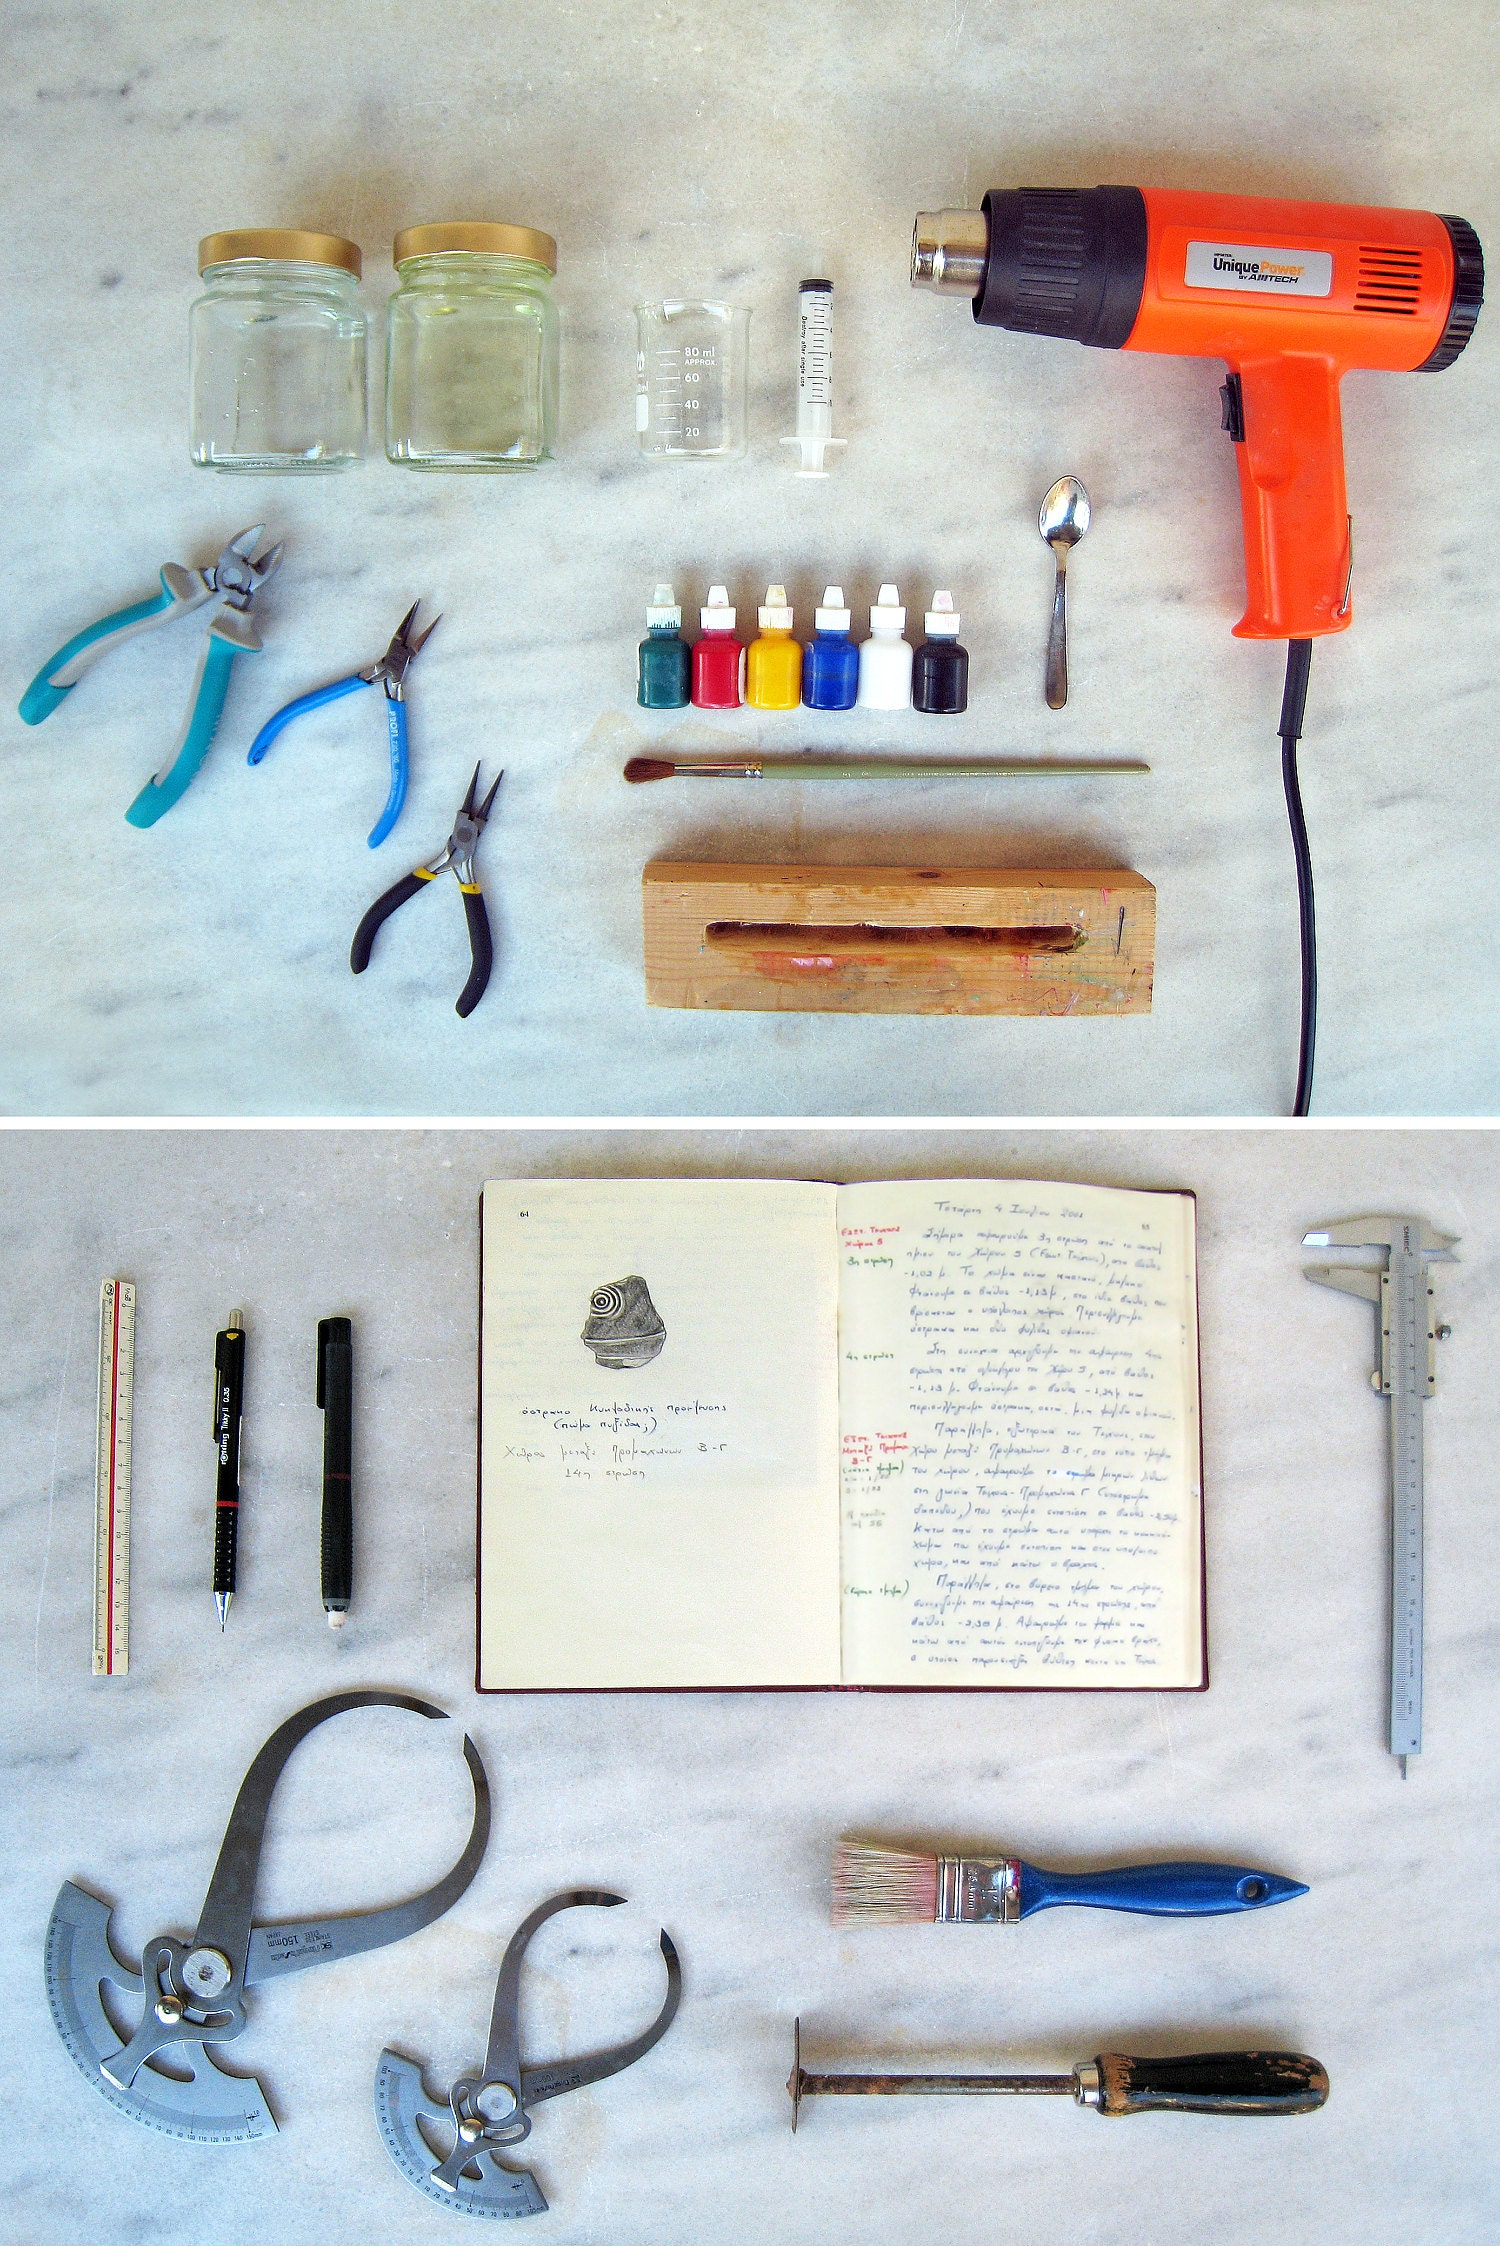 Jeweler's tools and archaeology tools